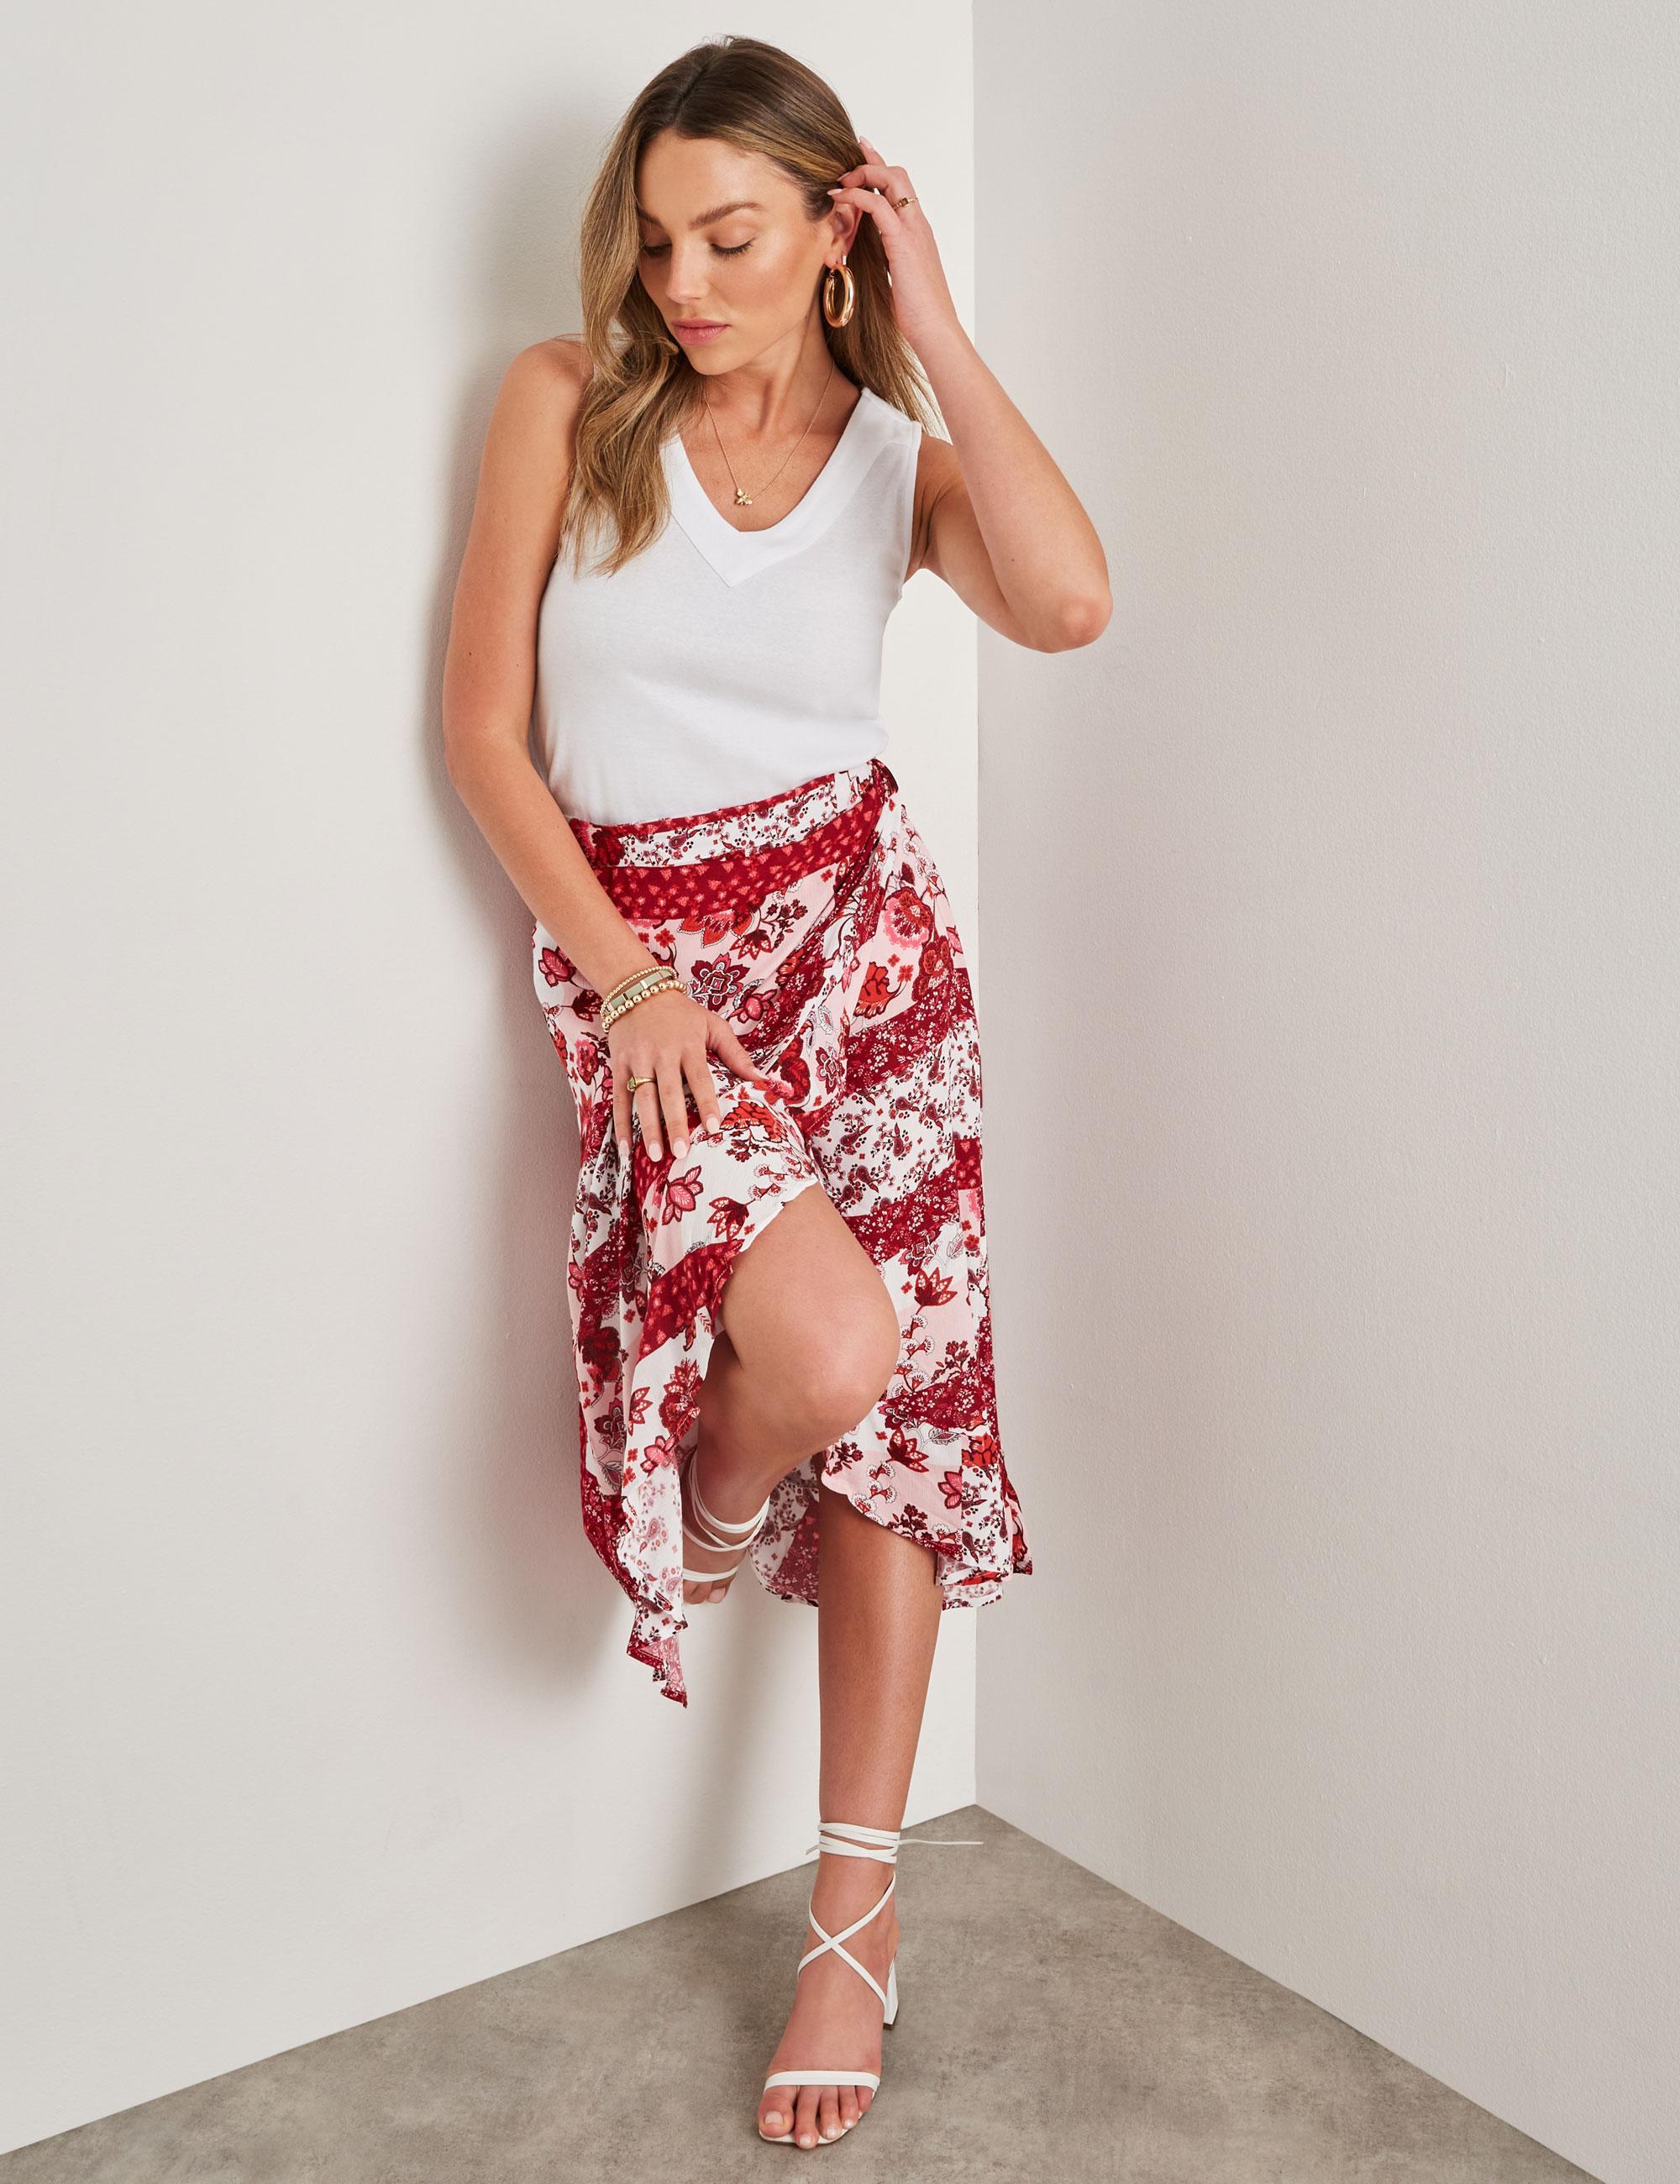 ROCKMANS - Womens Skirts - Midi - Summer - Red - Floral - Bodycon - Fashion - Berry Patchwork - Oversized - Tie Waist - Knee Length - Casual Clothes